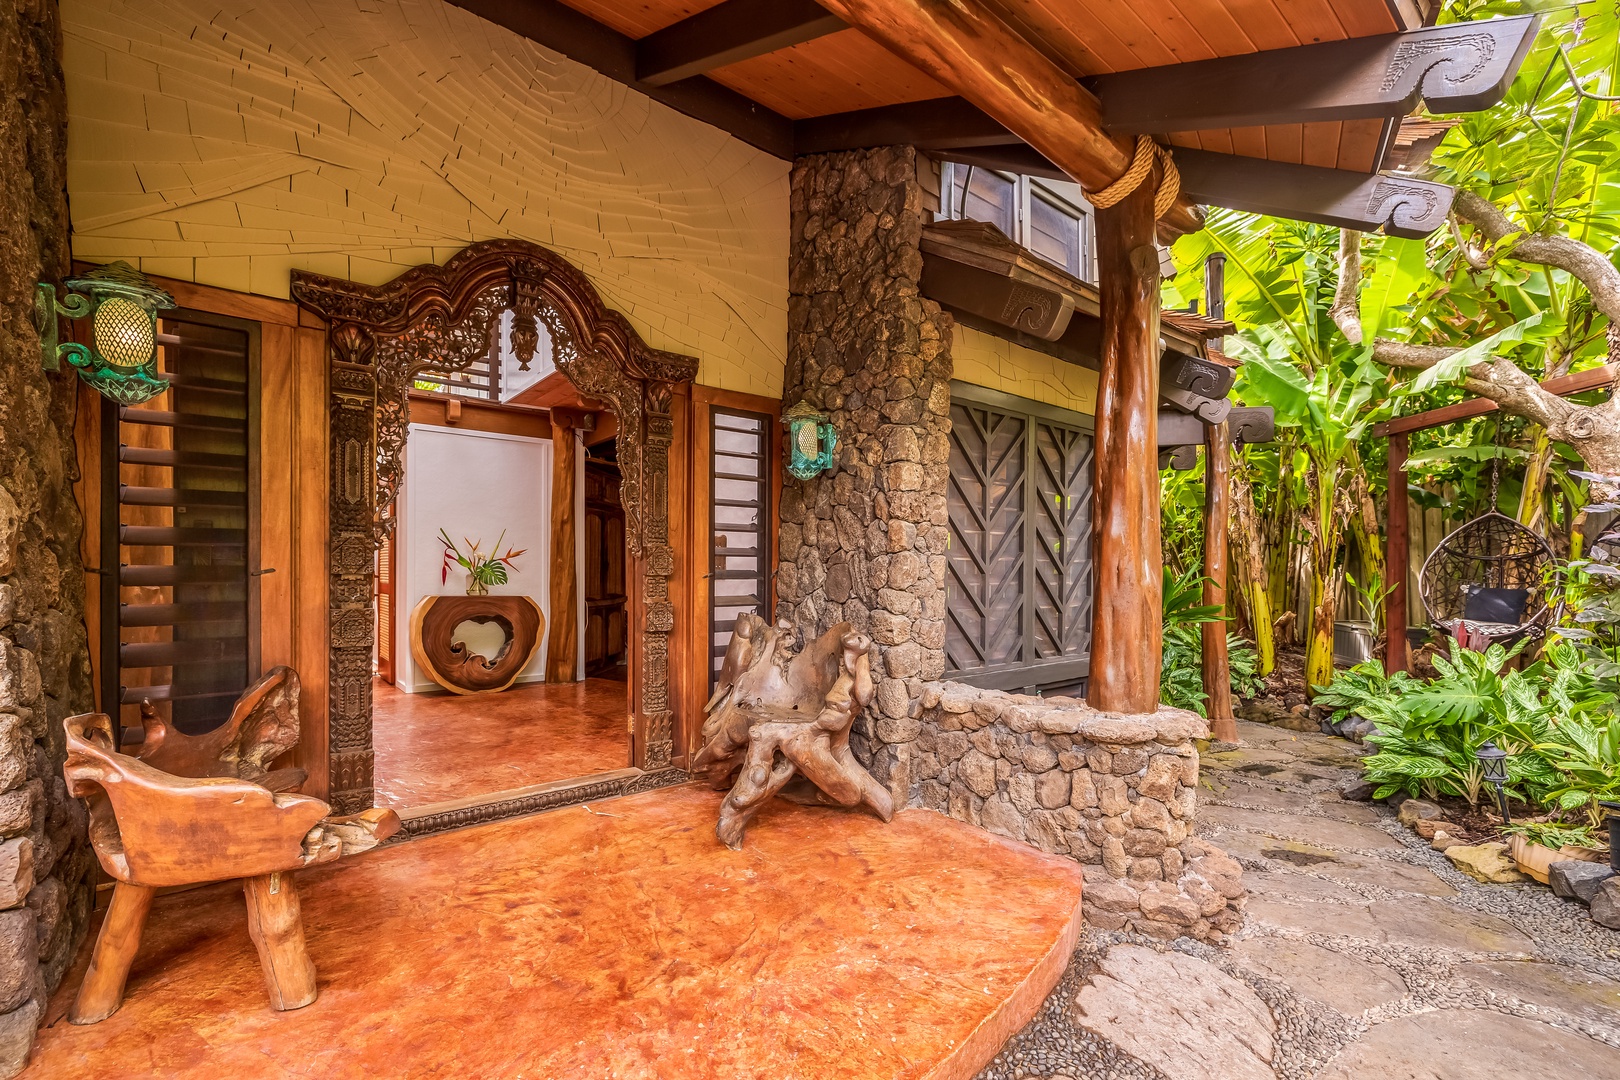 Waimanalo Vacation Rentals, Hawaii Hobbit House - Step into a cinematic retreat when you arrive at this property.